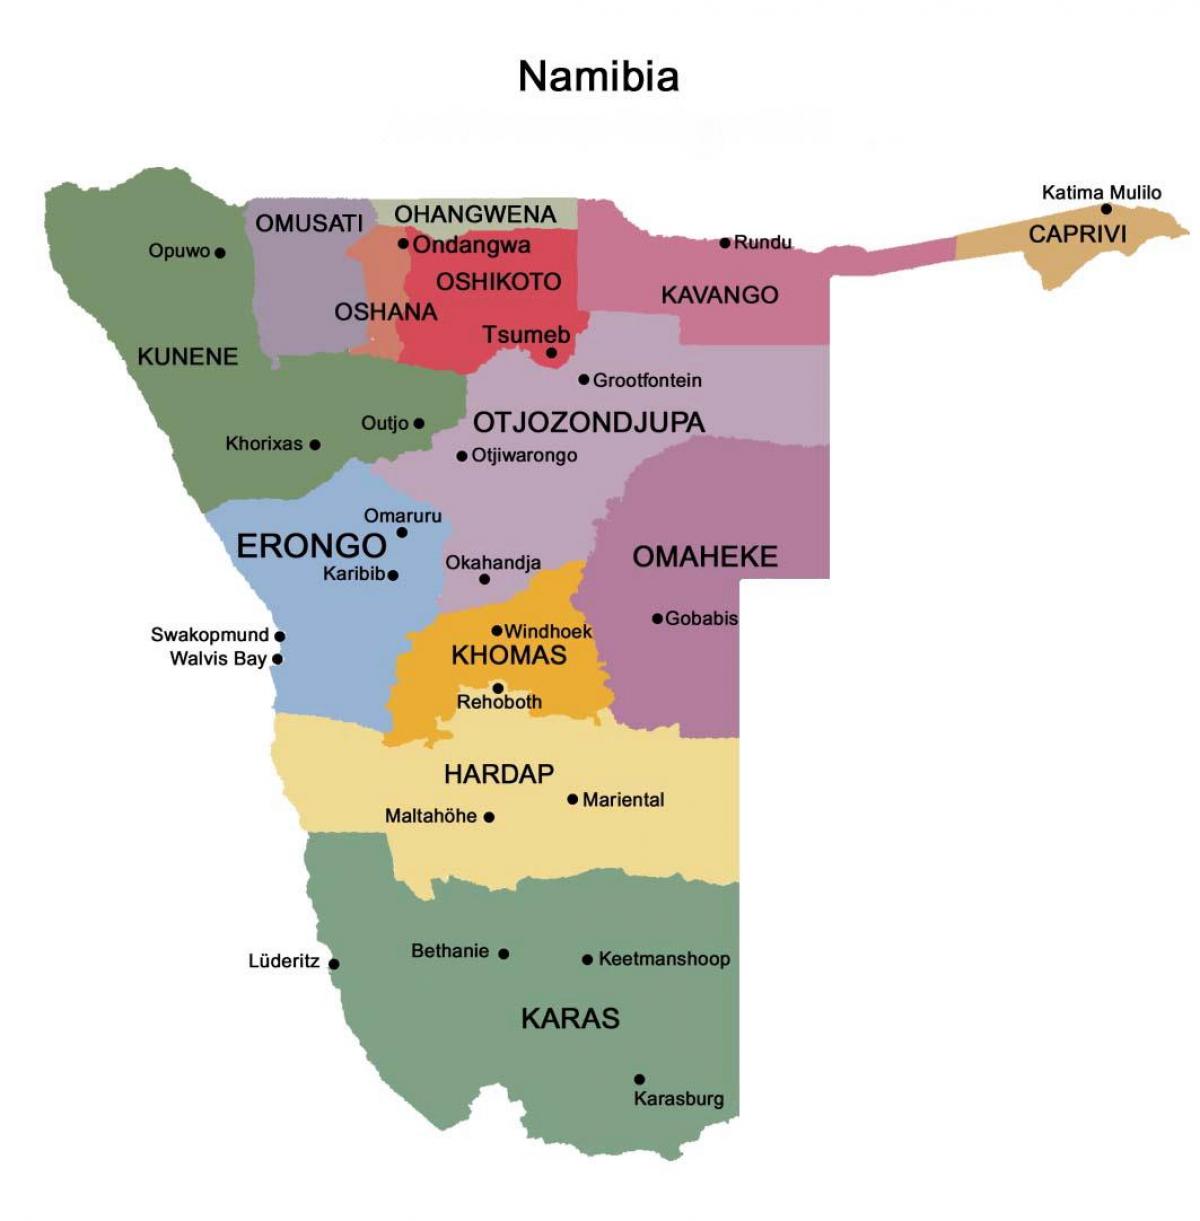 map of Namibia with regions and towns